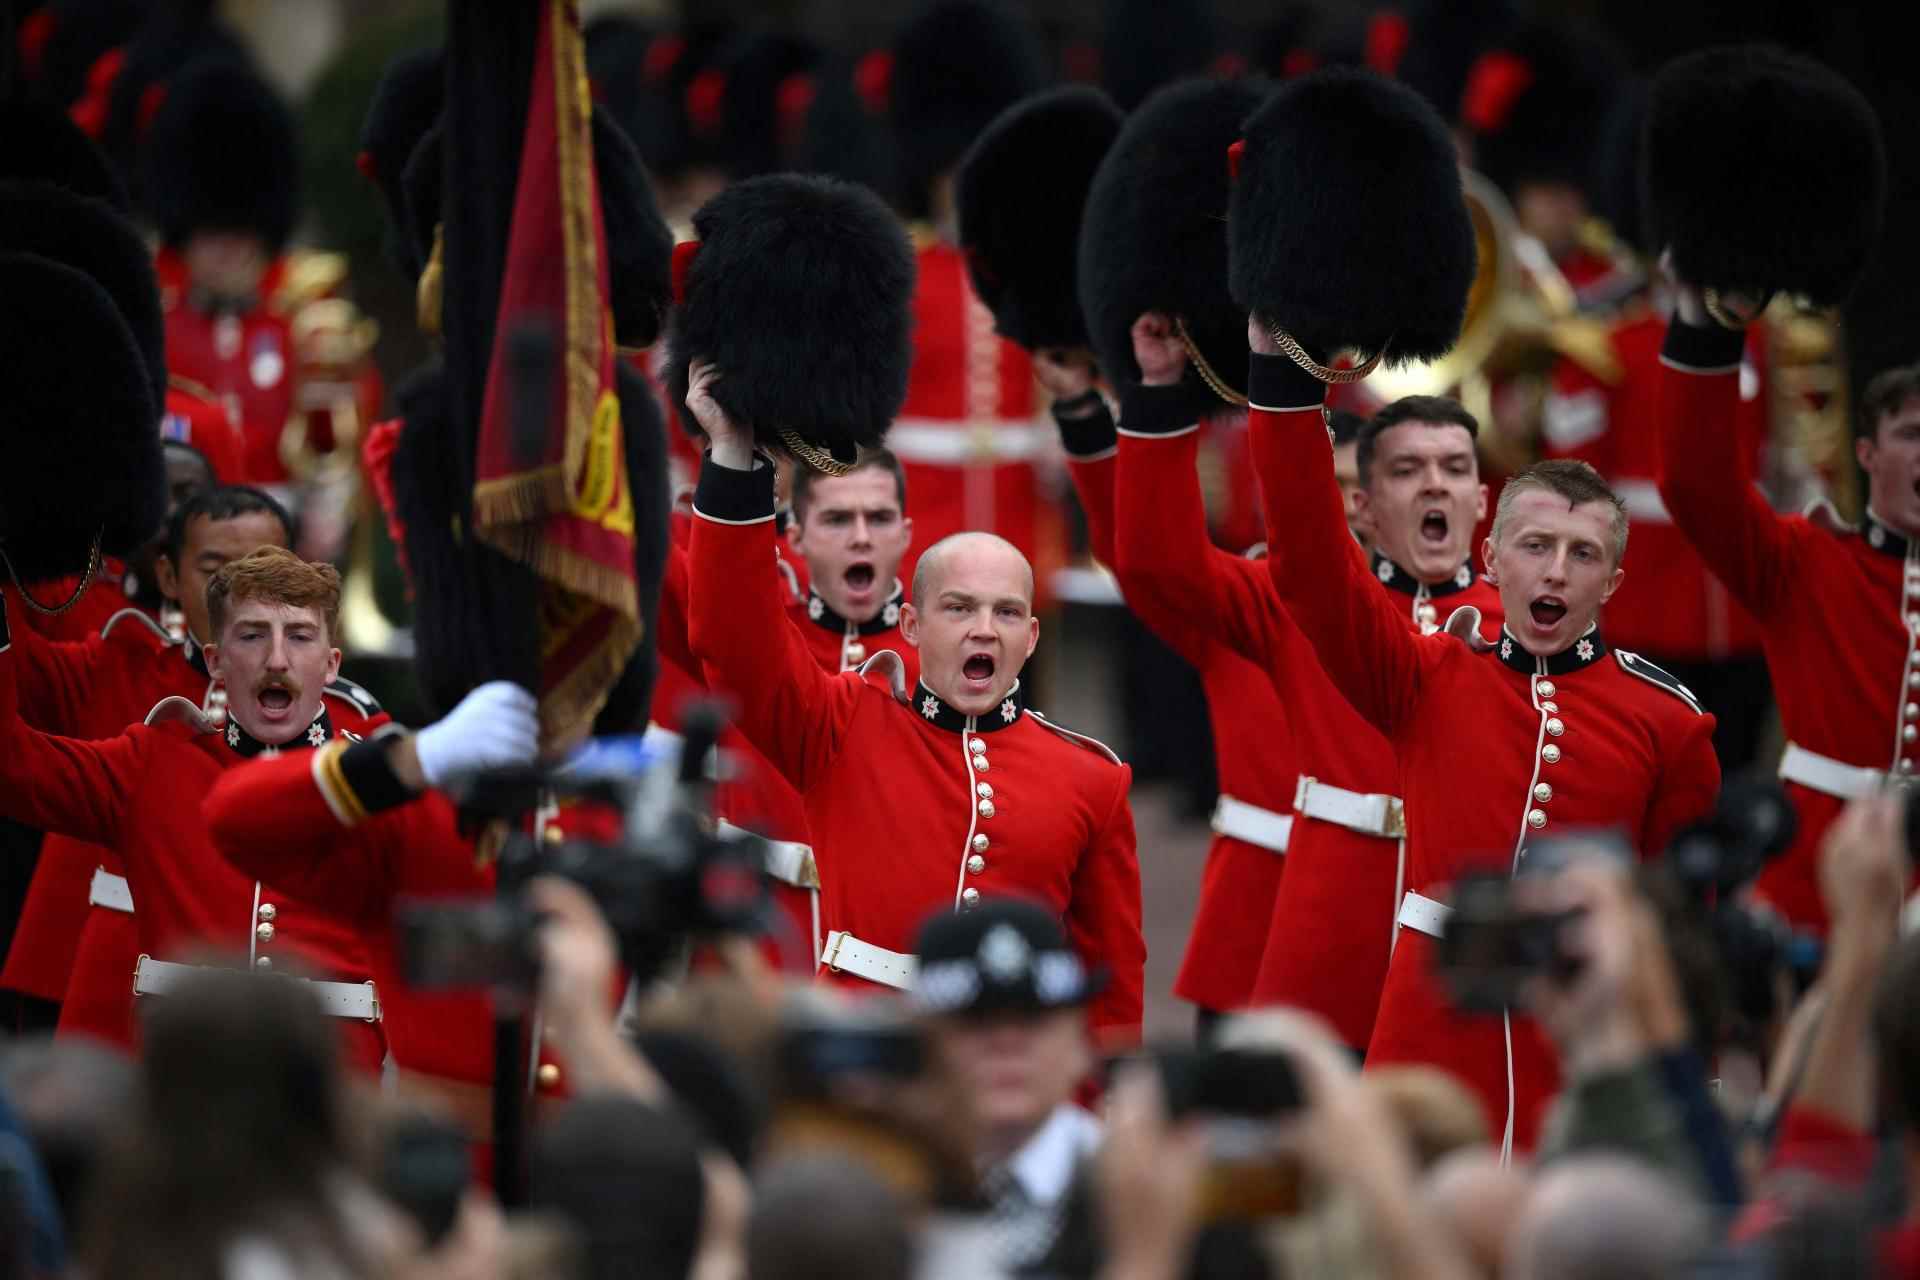 Members of the Coldstream Guards raise their hats to greet the new King, in Friary Court at St James's Palace in London, September 10, 2022.